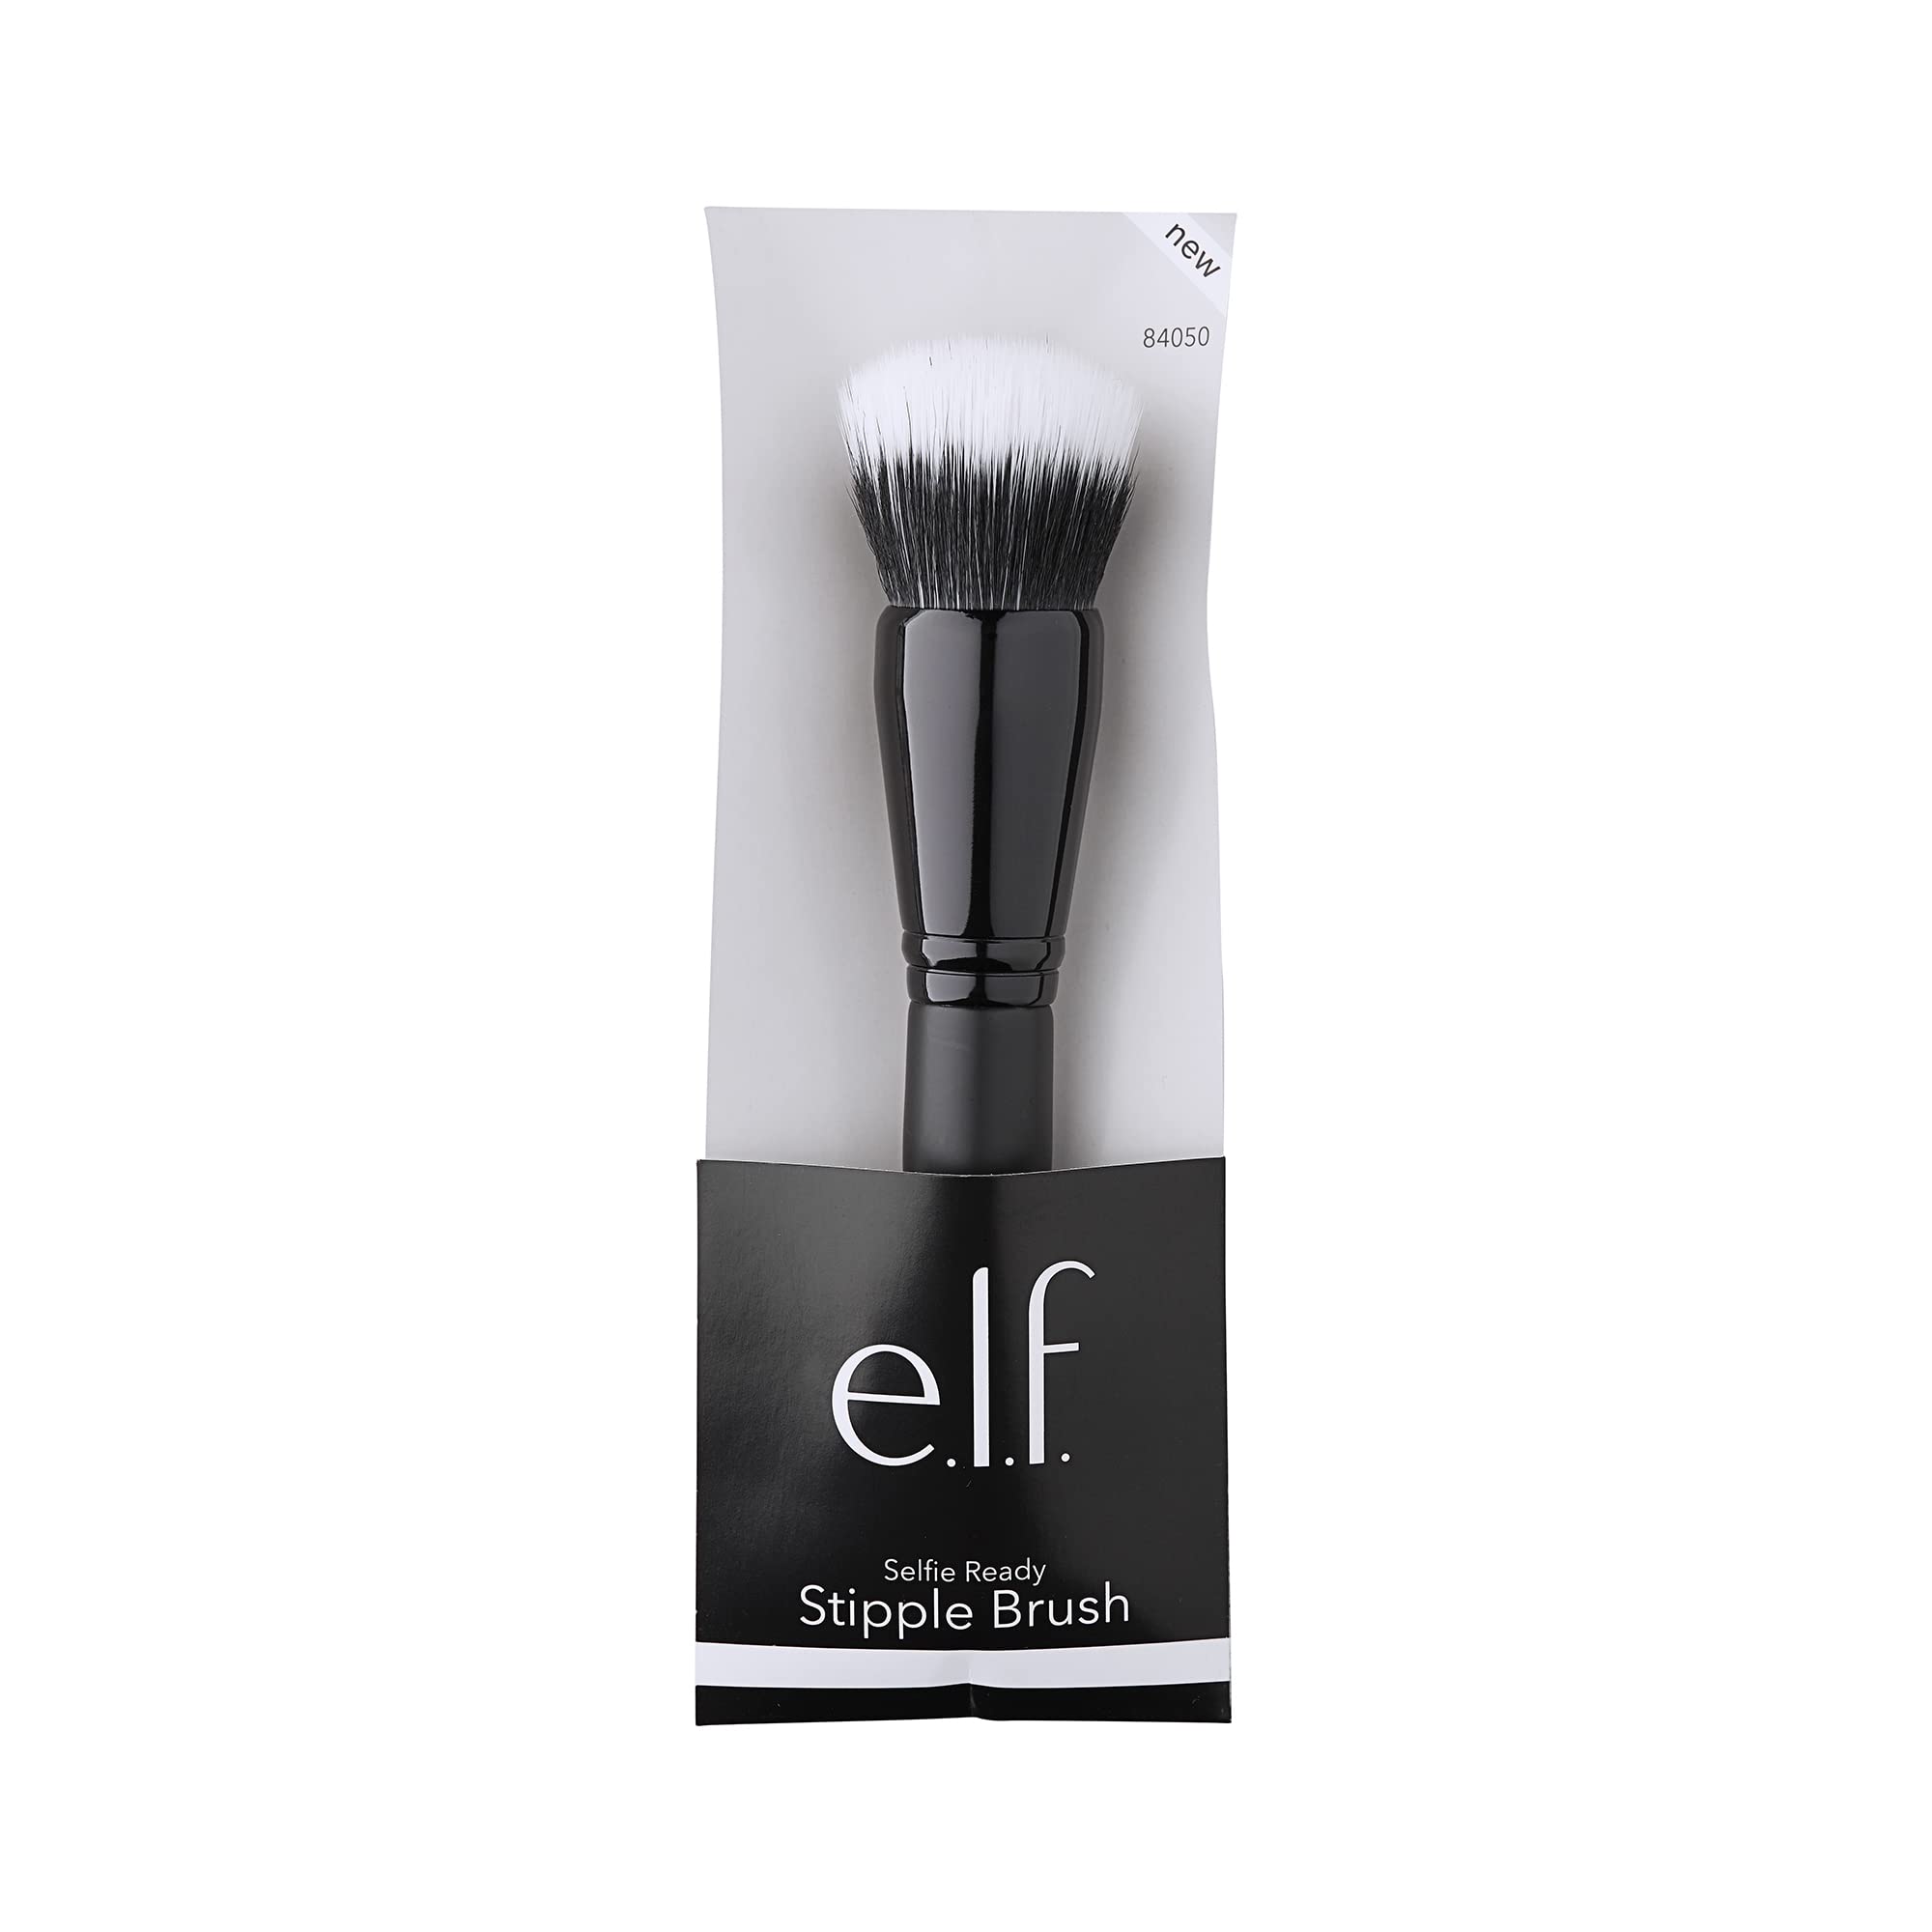 e.l.f. Domed Stipple Brush, Makeup Brush For Blending Product Into Skin, Creates A Soft Focus Effect, Made With Synthetic Bristles